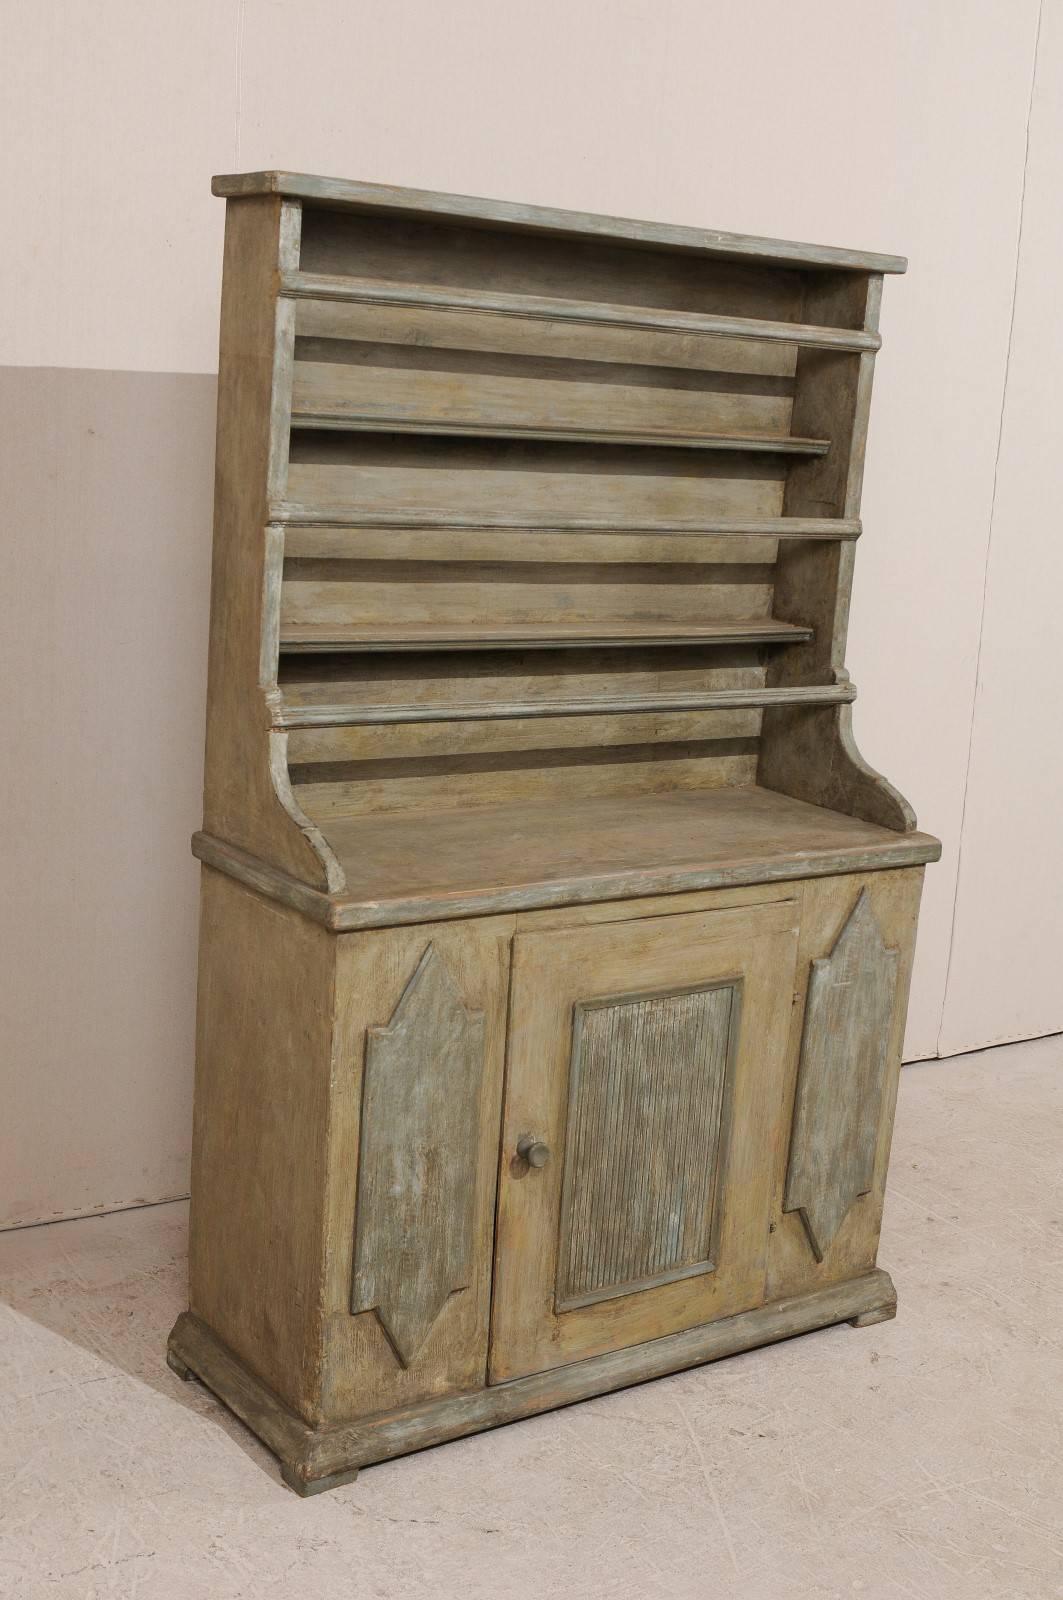 19th Century Period Gustavian, Swedish Painted Wood Cabinet with Plate Rack 1